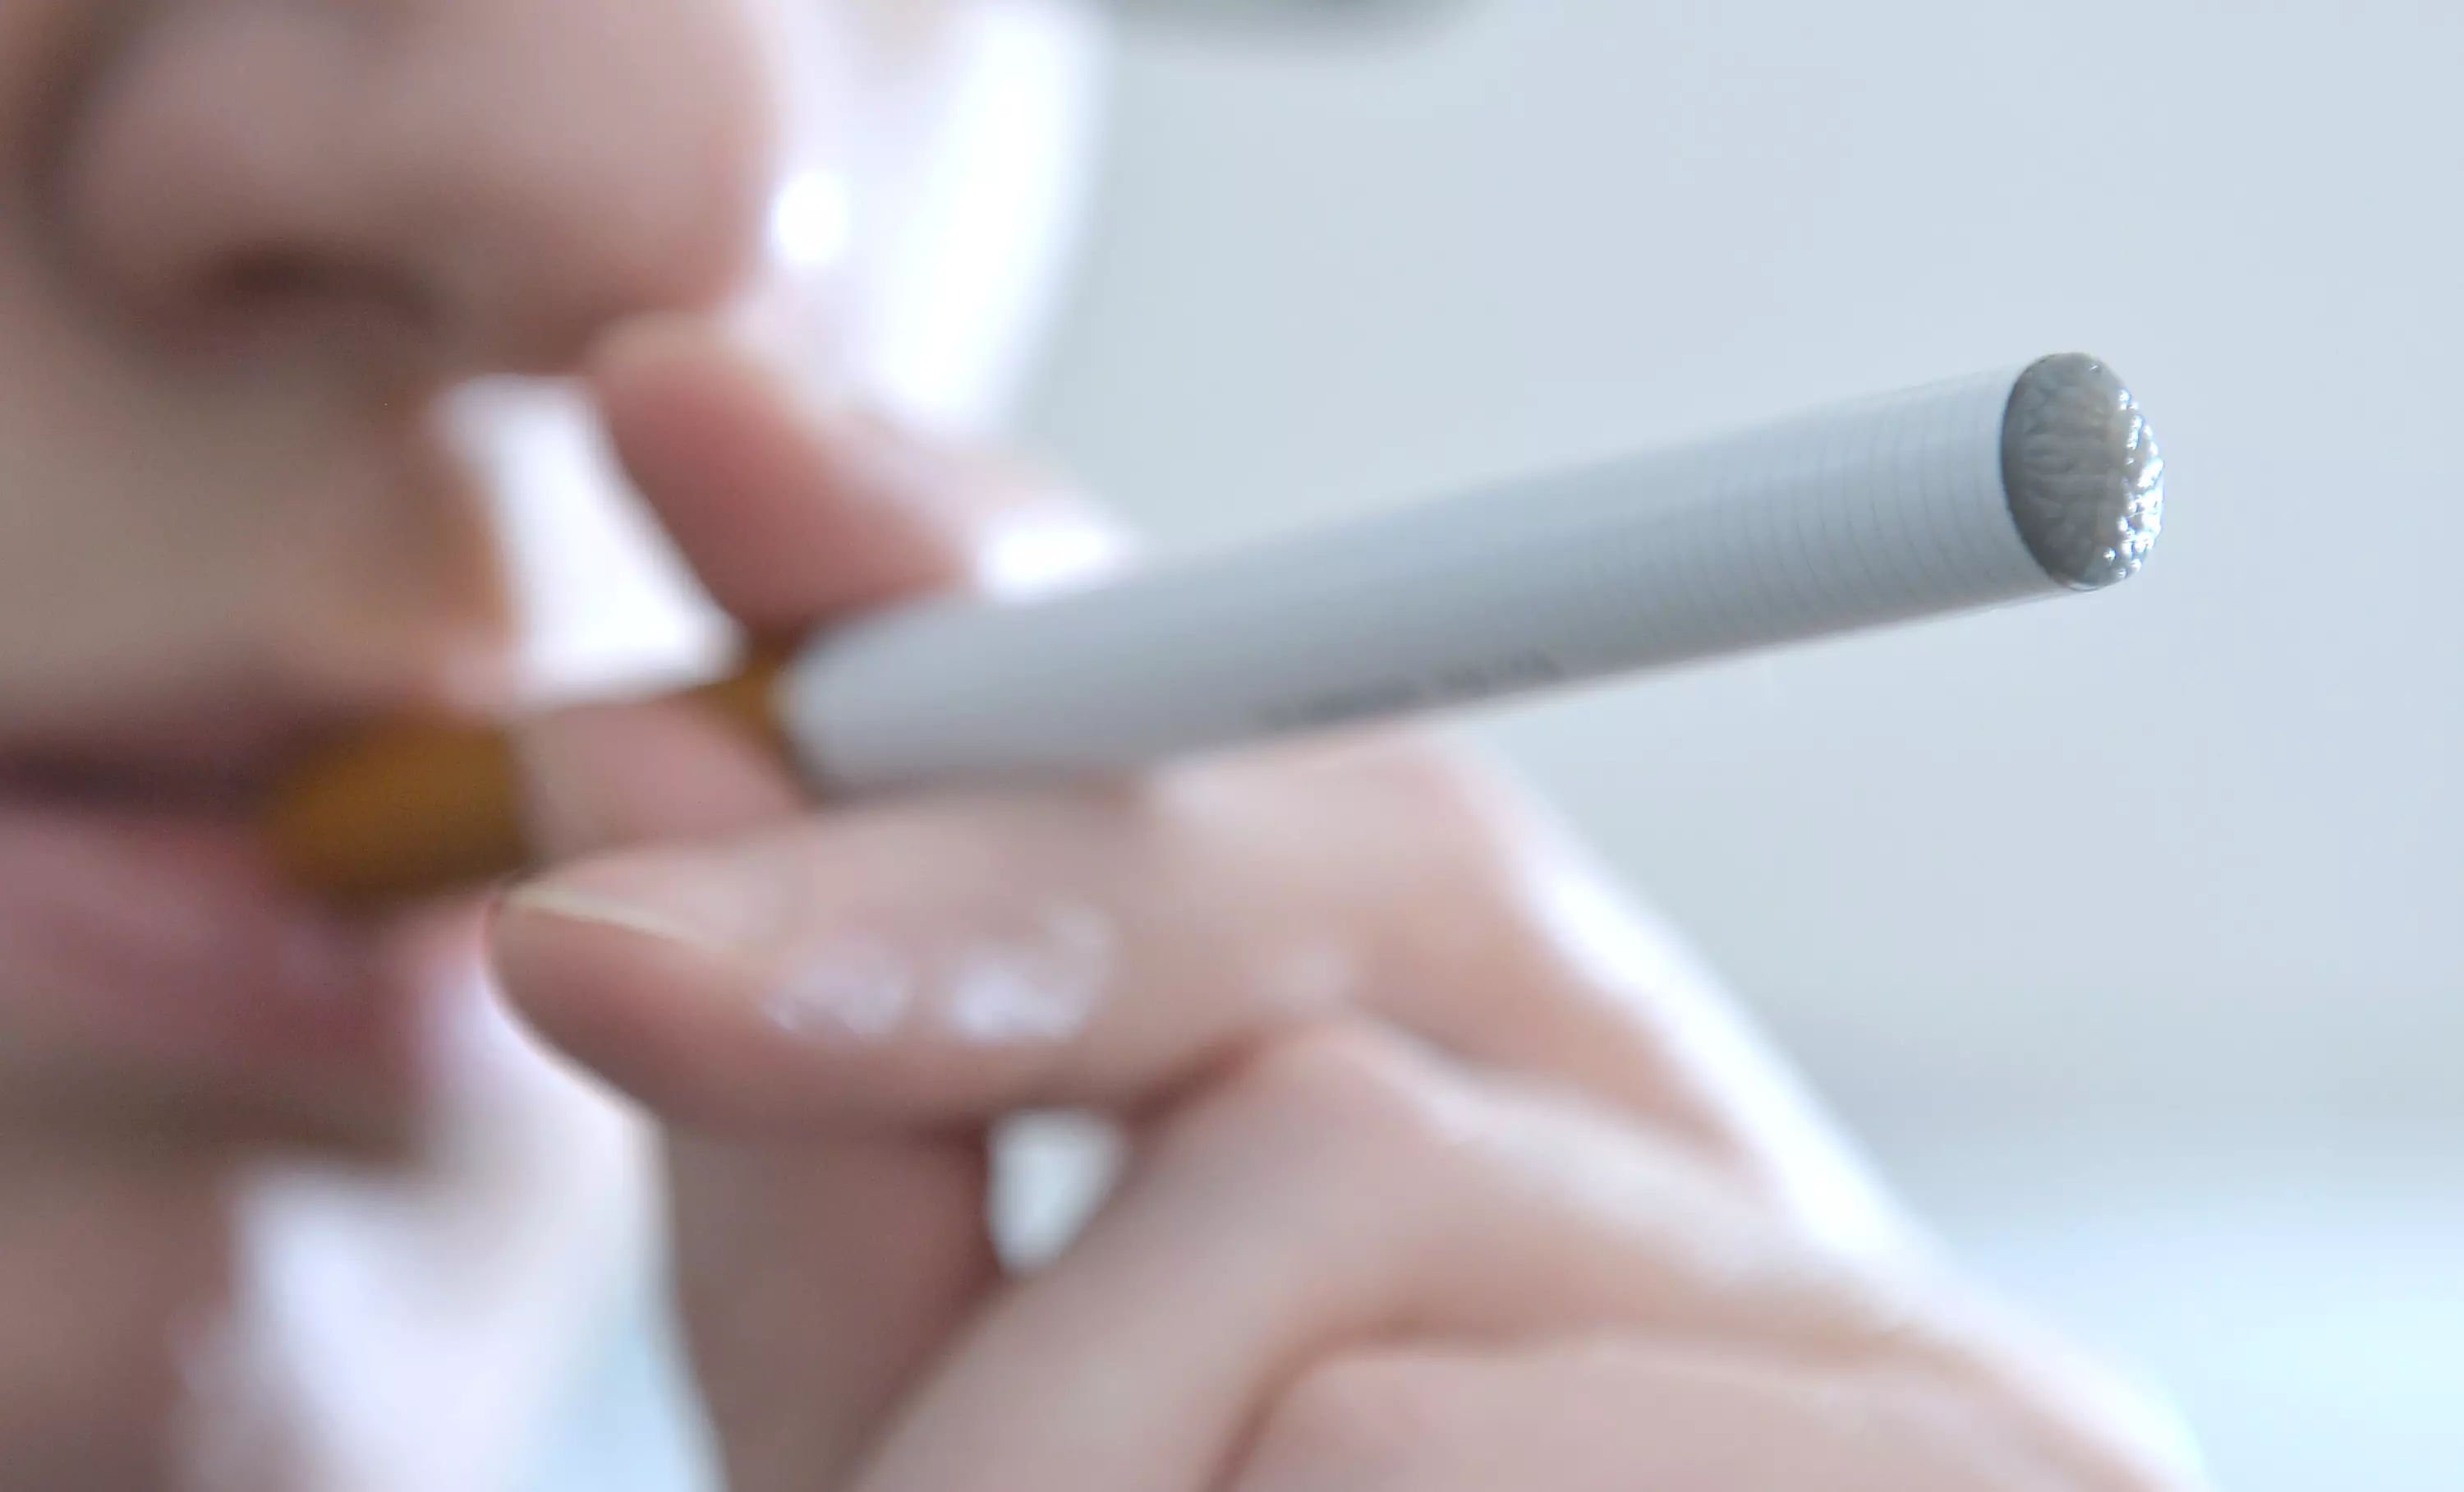 Public Health England has warned people of the myths surrounding vaping.